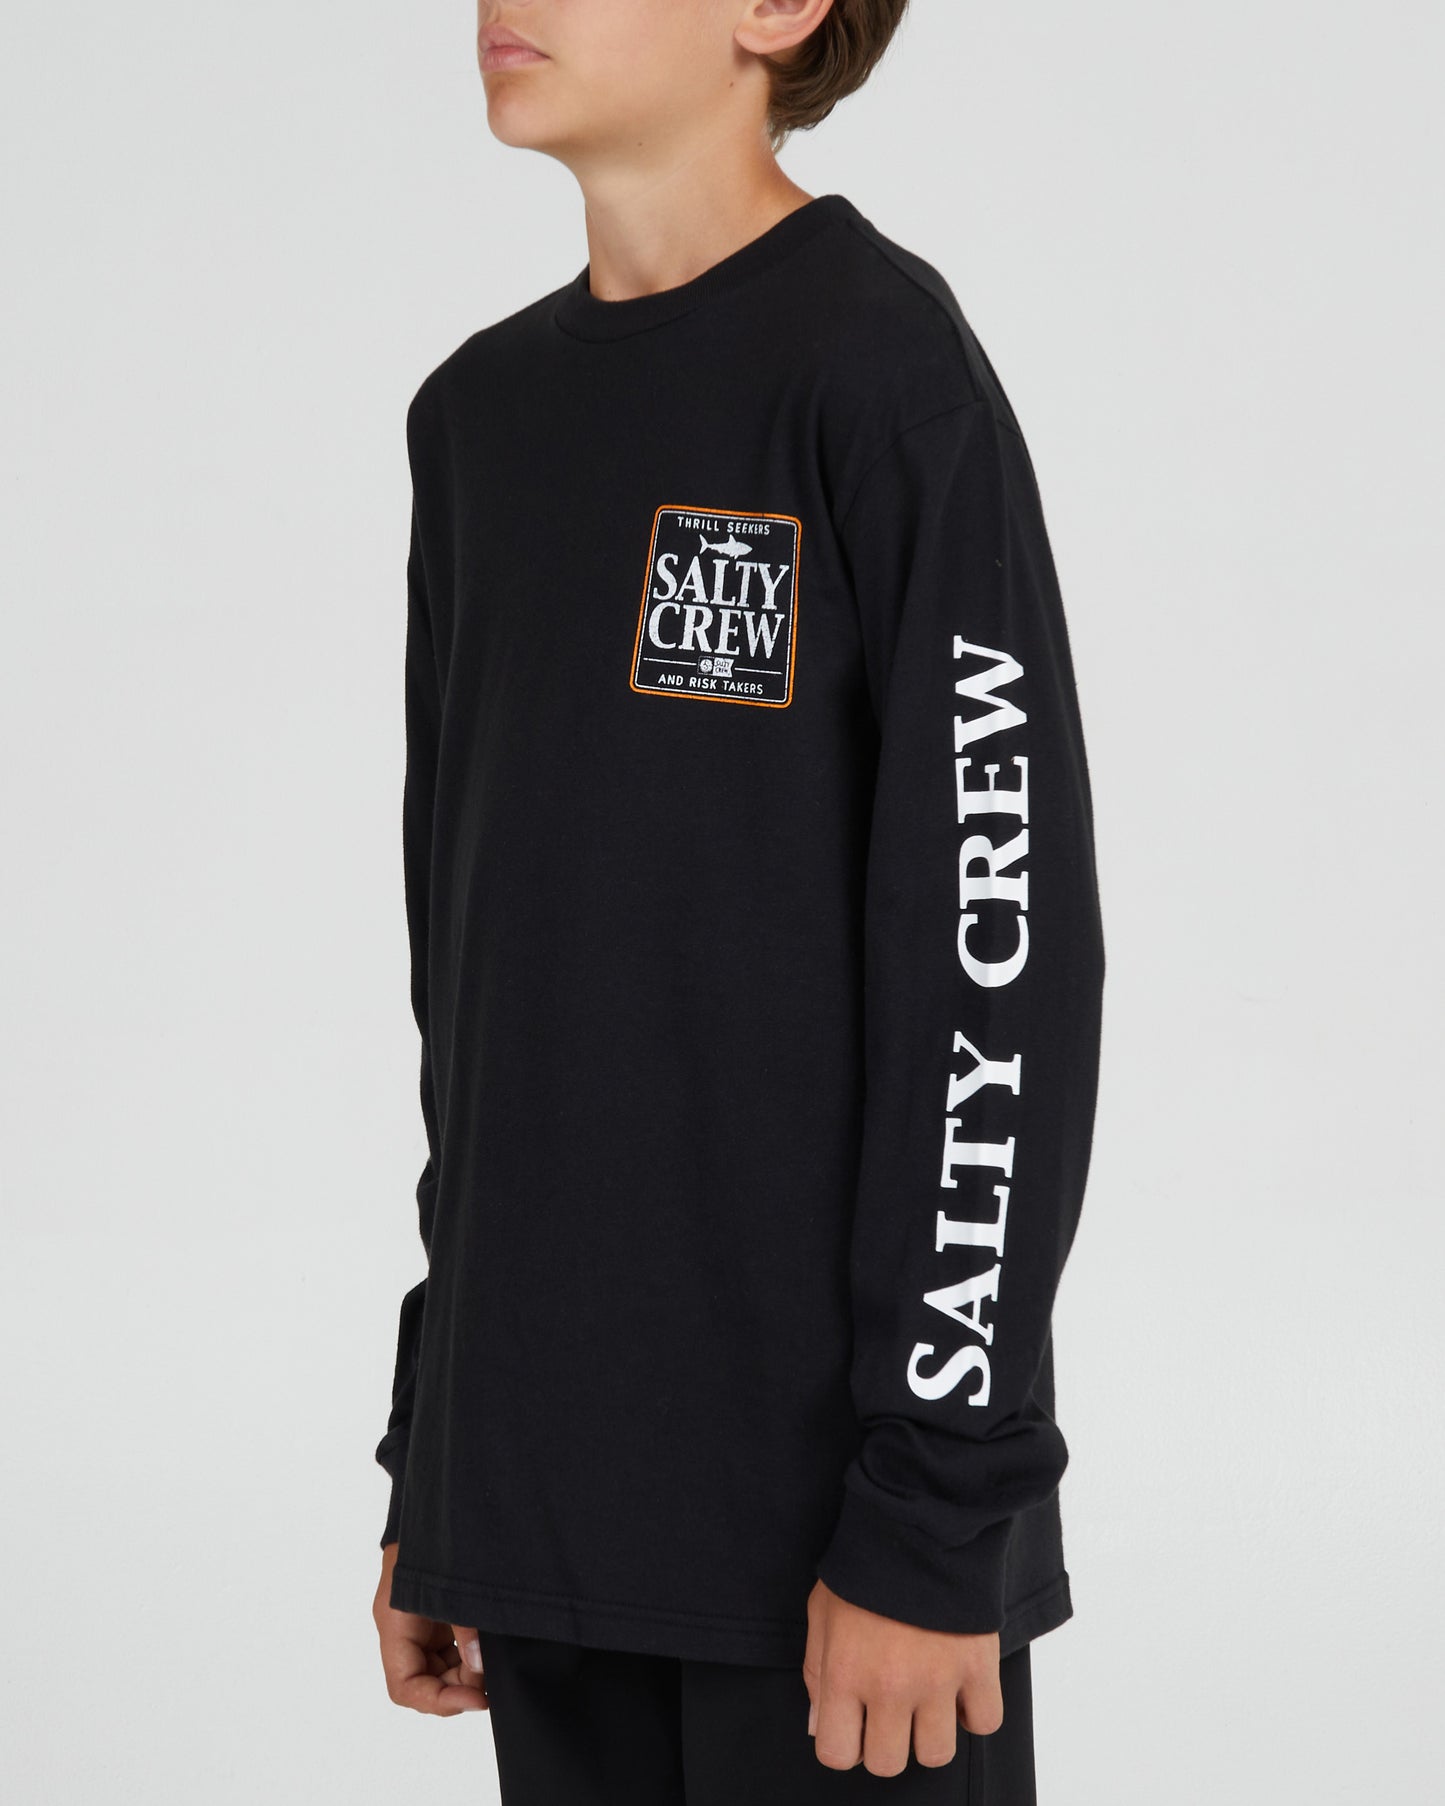 On body front angle of the Coaster Boys Black L/S Tee